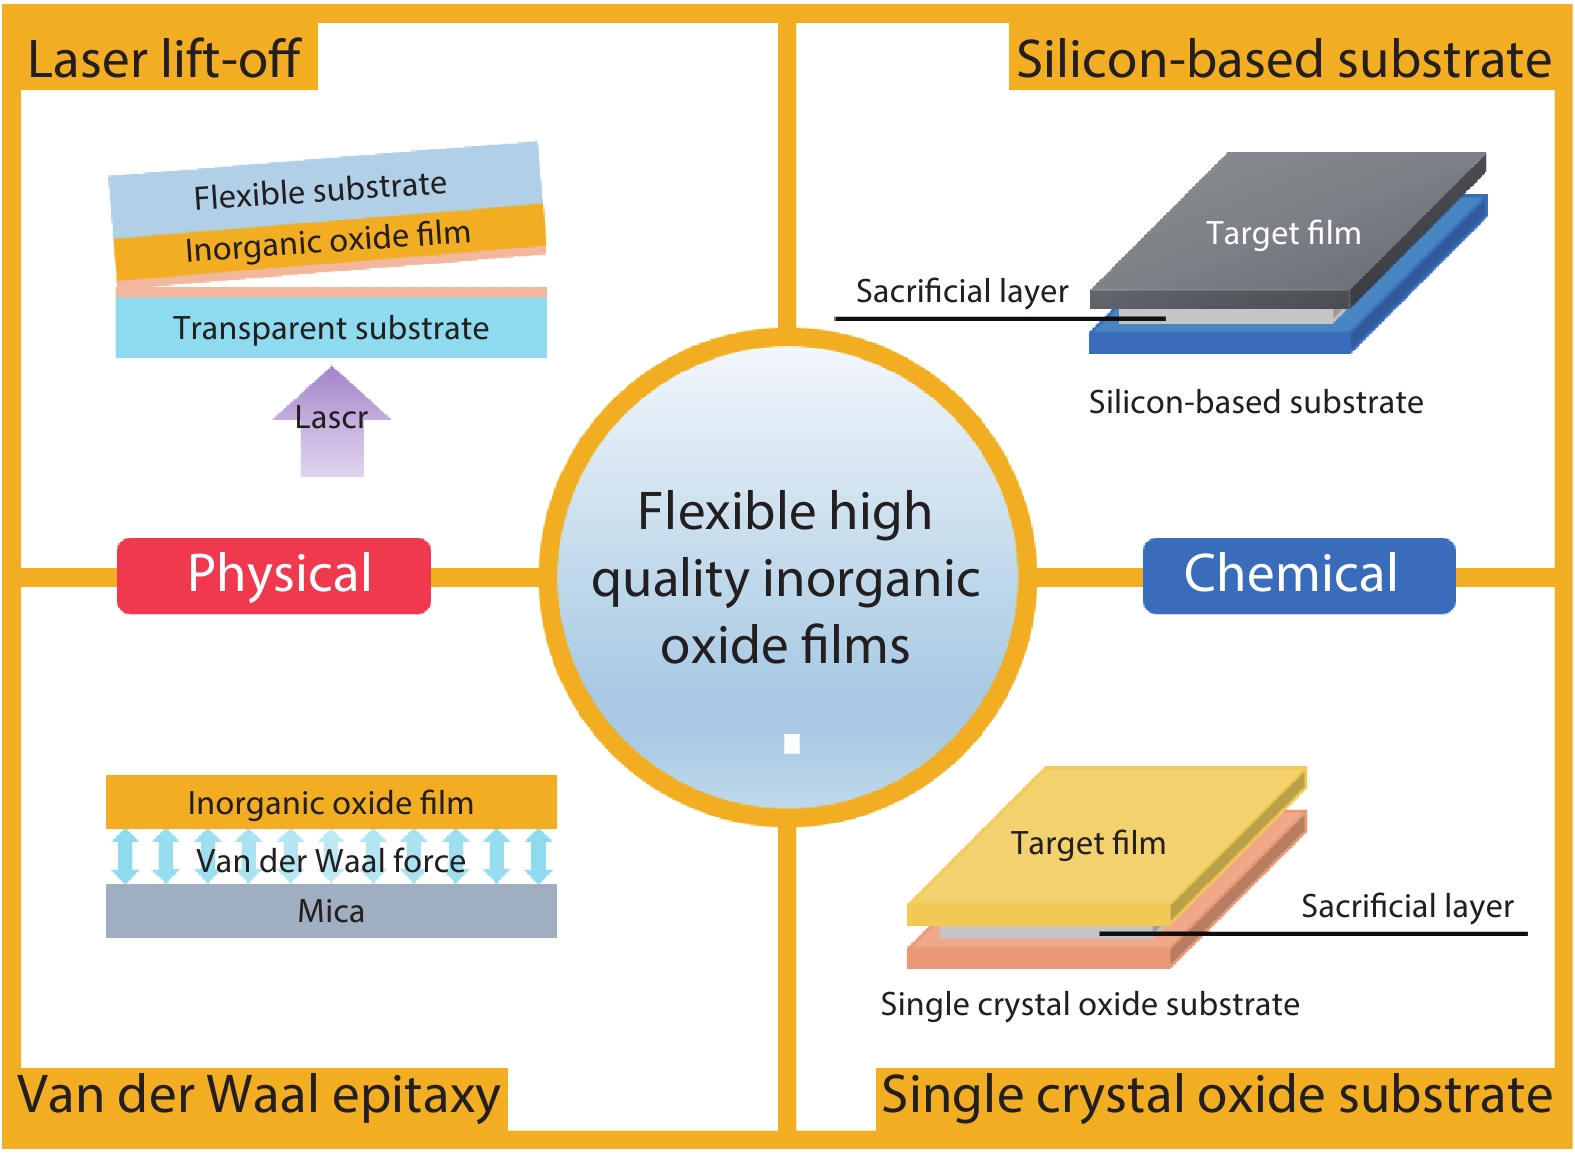 (Color online) Advanced strategies for high quality inorganic oxide thin-film flexibility. In particular, the physical flexible strategies include LLO and van der Waal epitaxy, while the chemical flexible strategies include transferring films from silicon-based substrates and traditional single crystal oxide substrates to flexible substrates after etching the sacrificial layer.